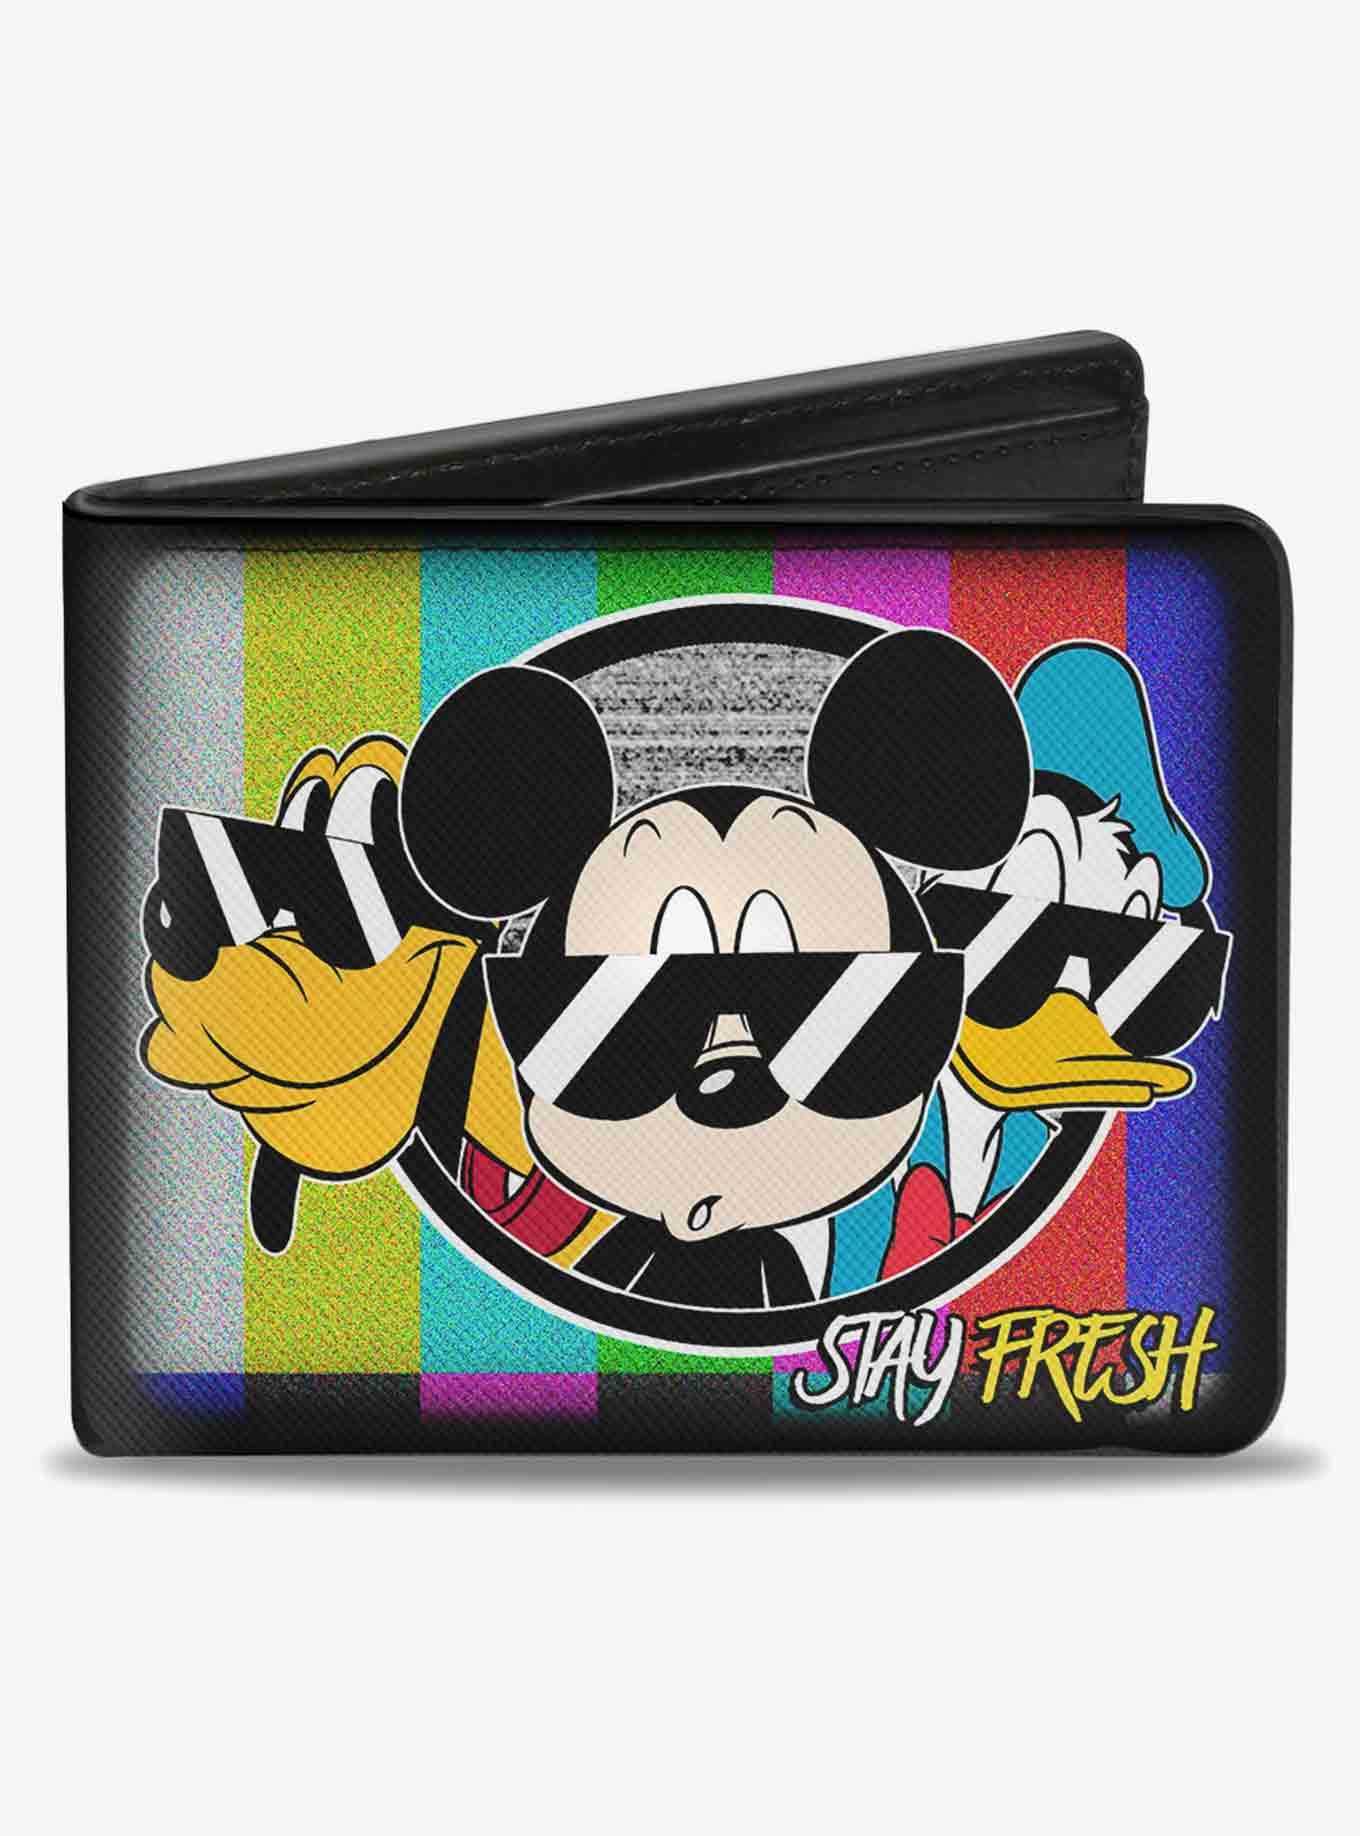 Disney Pluto Mickey Mouse Donald Duck Stay Fresh Group Bifold Wallet, , hi-res